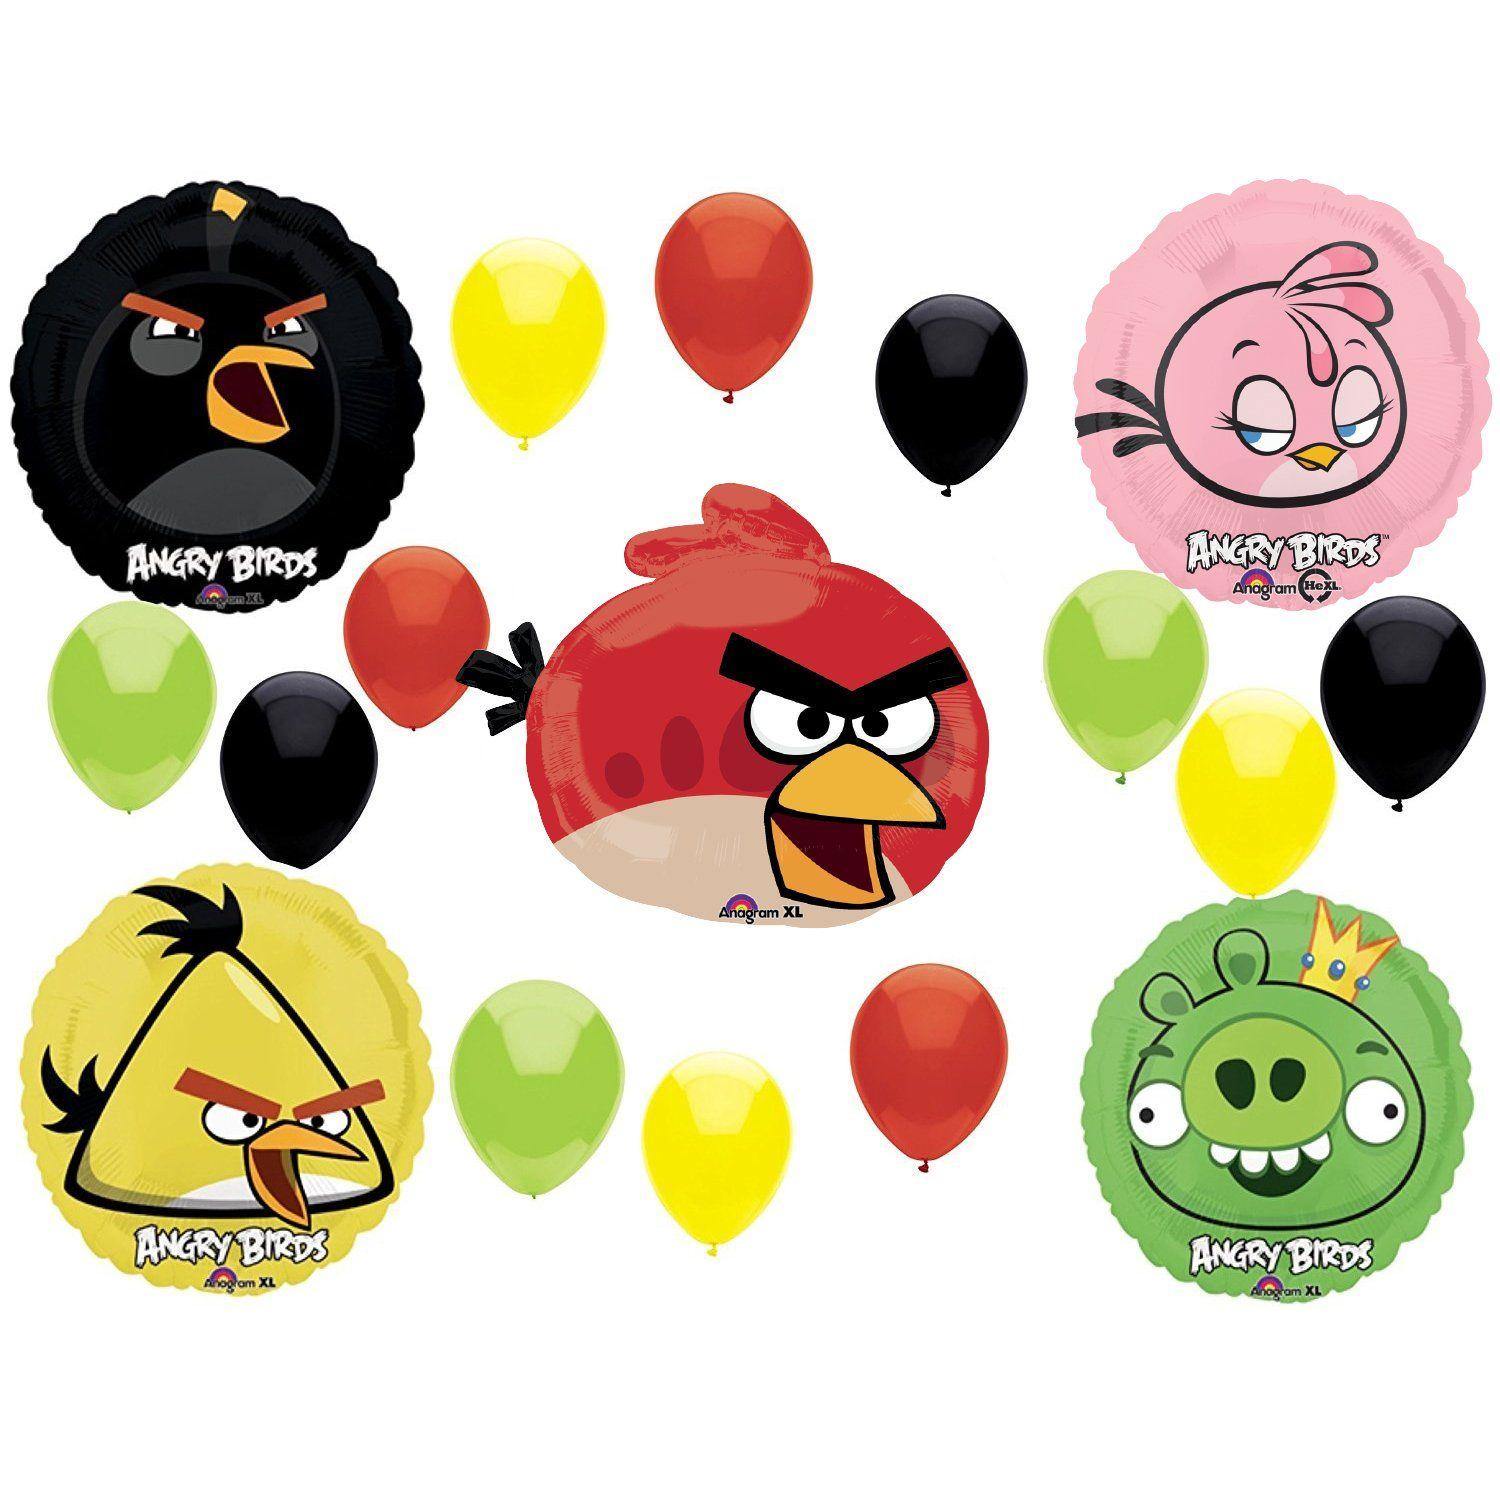 Green and Red Bird Shop Logo - Amazon.com: Angry Birds Birthday Party Supplies and Red Bird Balloon ...